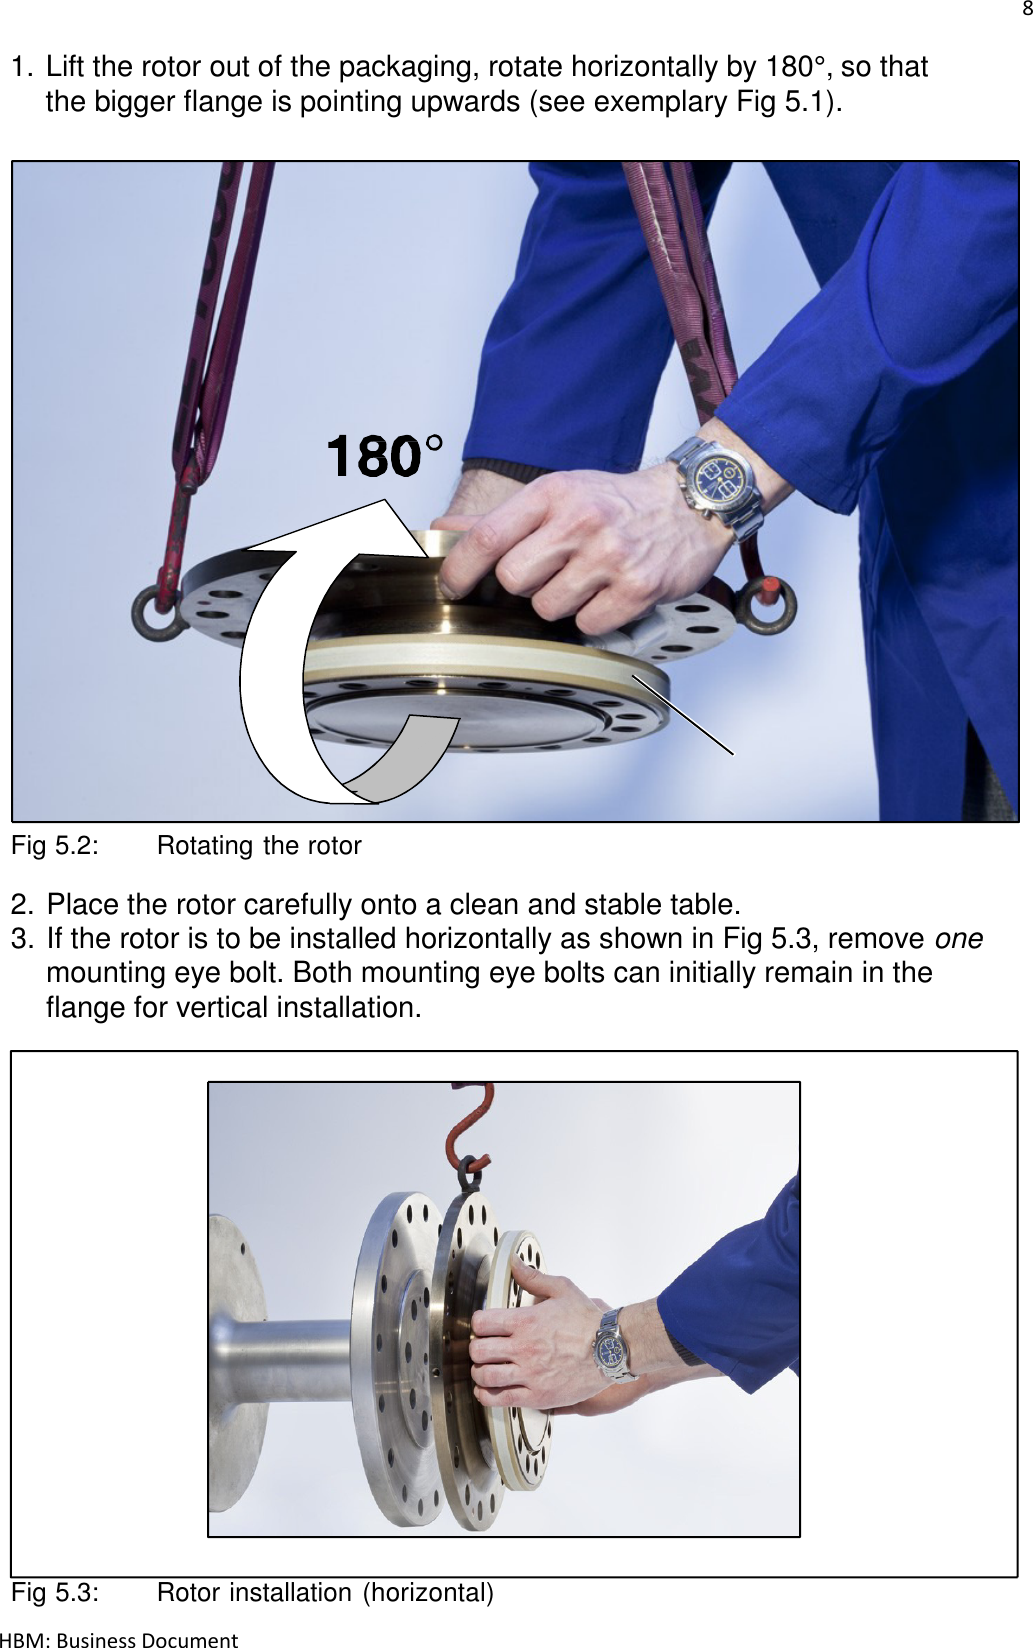 8  HBM: Business Document 1. Lift the rotor out of the packaging, rotate horizontally by 180°, so that the bigger flange is pointing upwards (see exemplary Fig 5.1).                               Flange B    Fig 5.2:   Rotating the rotor  2. Place the rotor carefully onto a clean and stable table. 3. If the rotor is to be installed horizontally as shown in Fig 5.3, remove one mounting eye bolt. Both mounting eye bolts can initially remain in the flange for vertical installation.                           Fig 5.3:   Rotor installation (horizontal) 